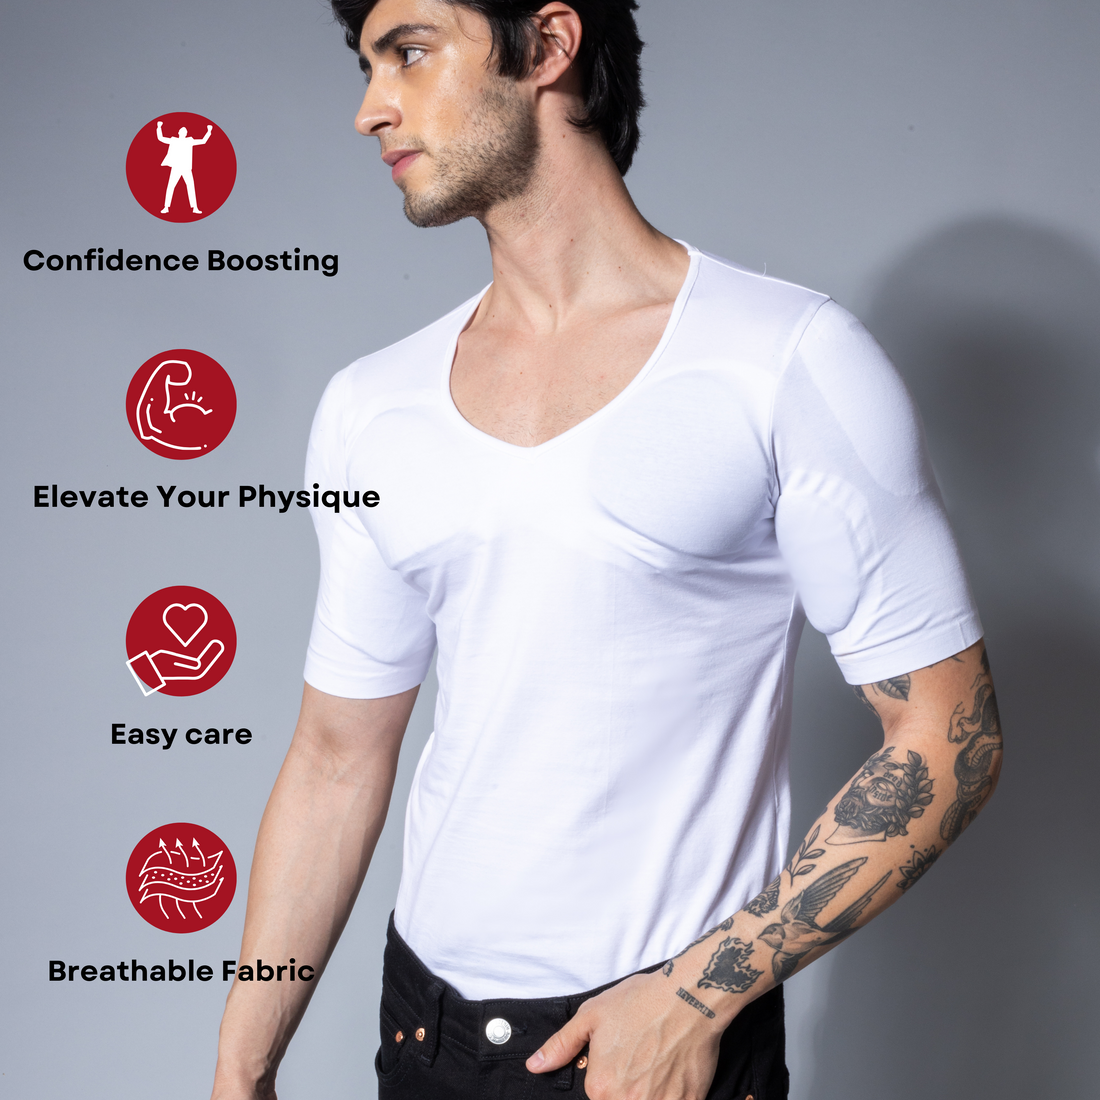 Body Tech Co. presents India's First Revolutionising Lift Tech Muscle Padded Vest for Men